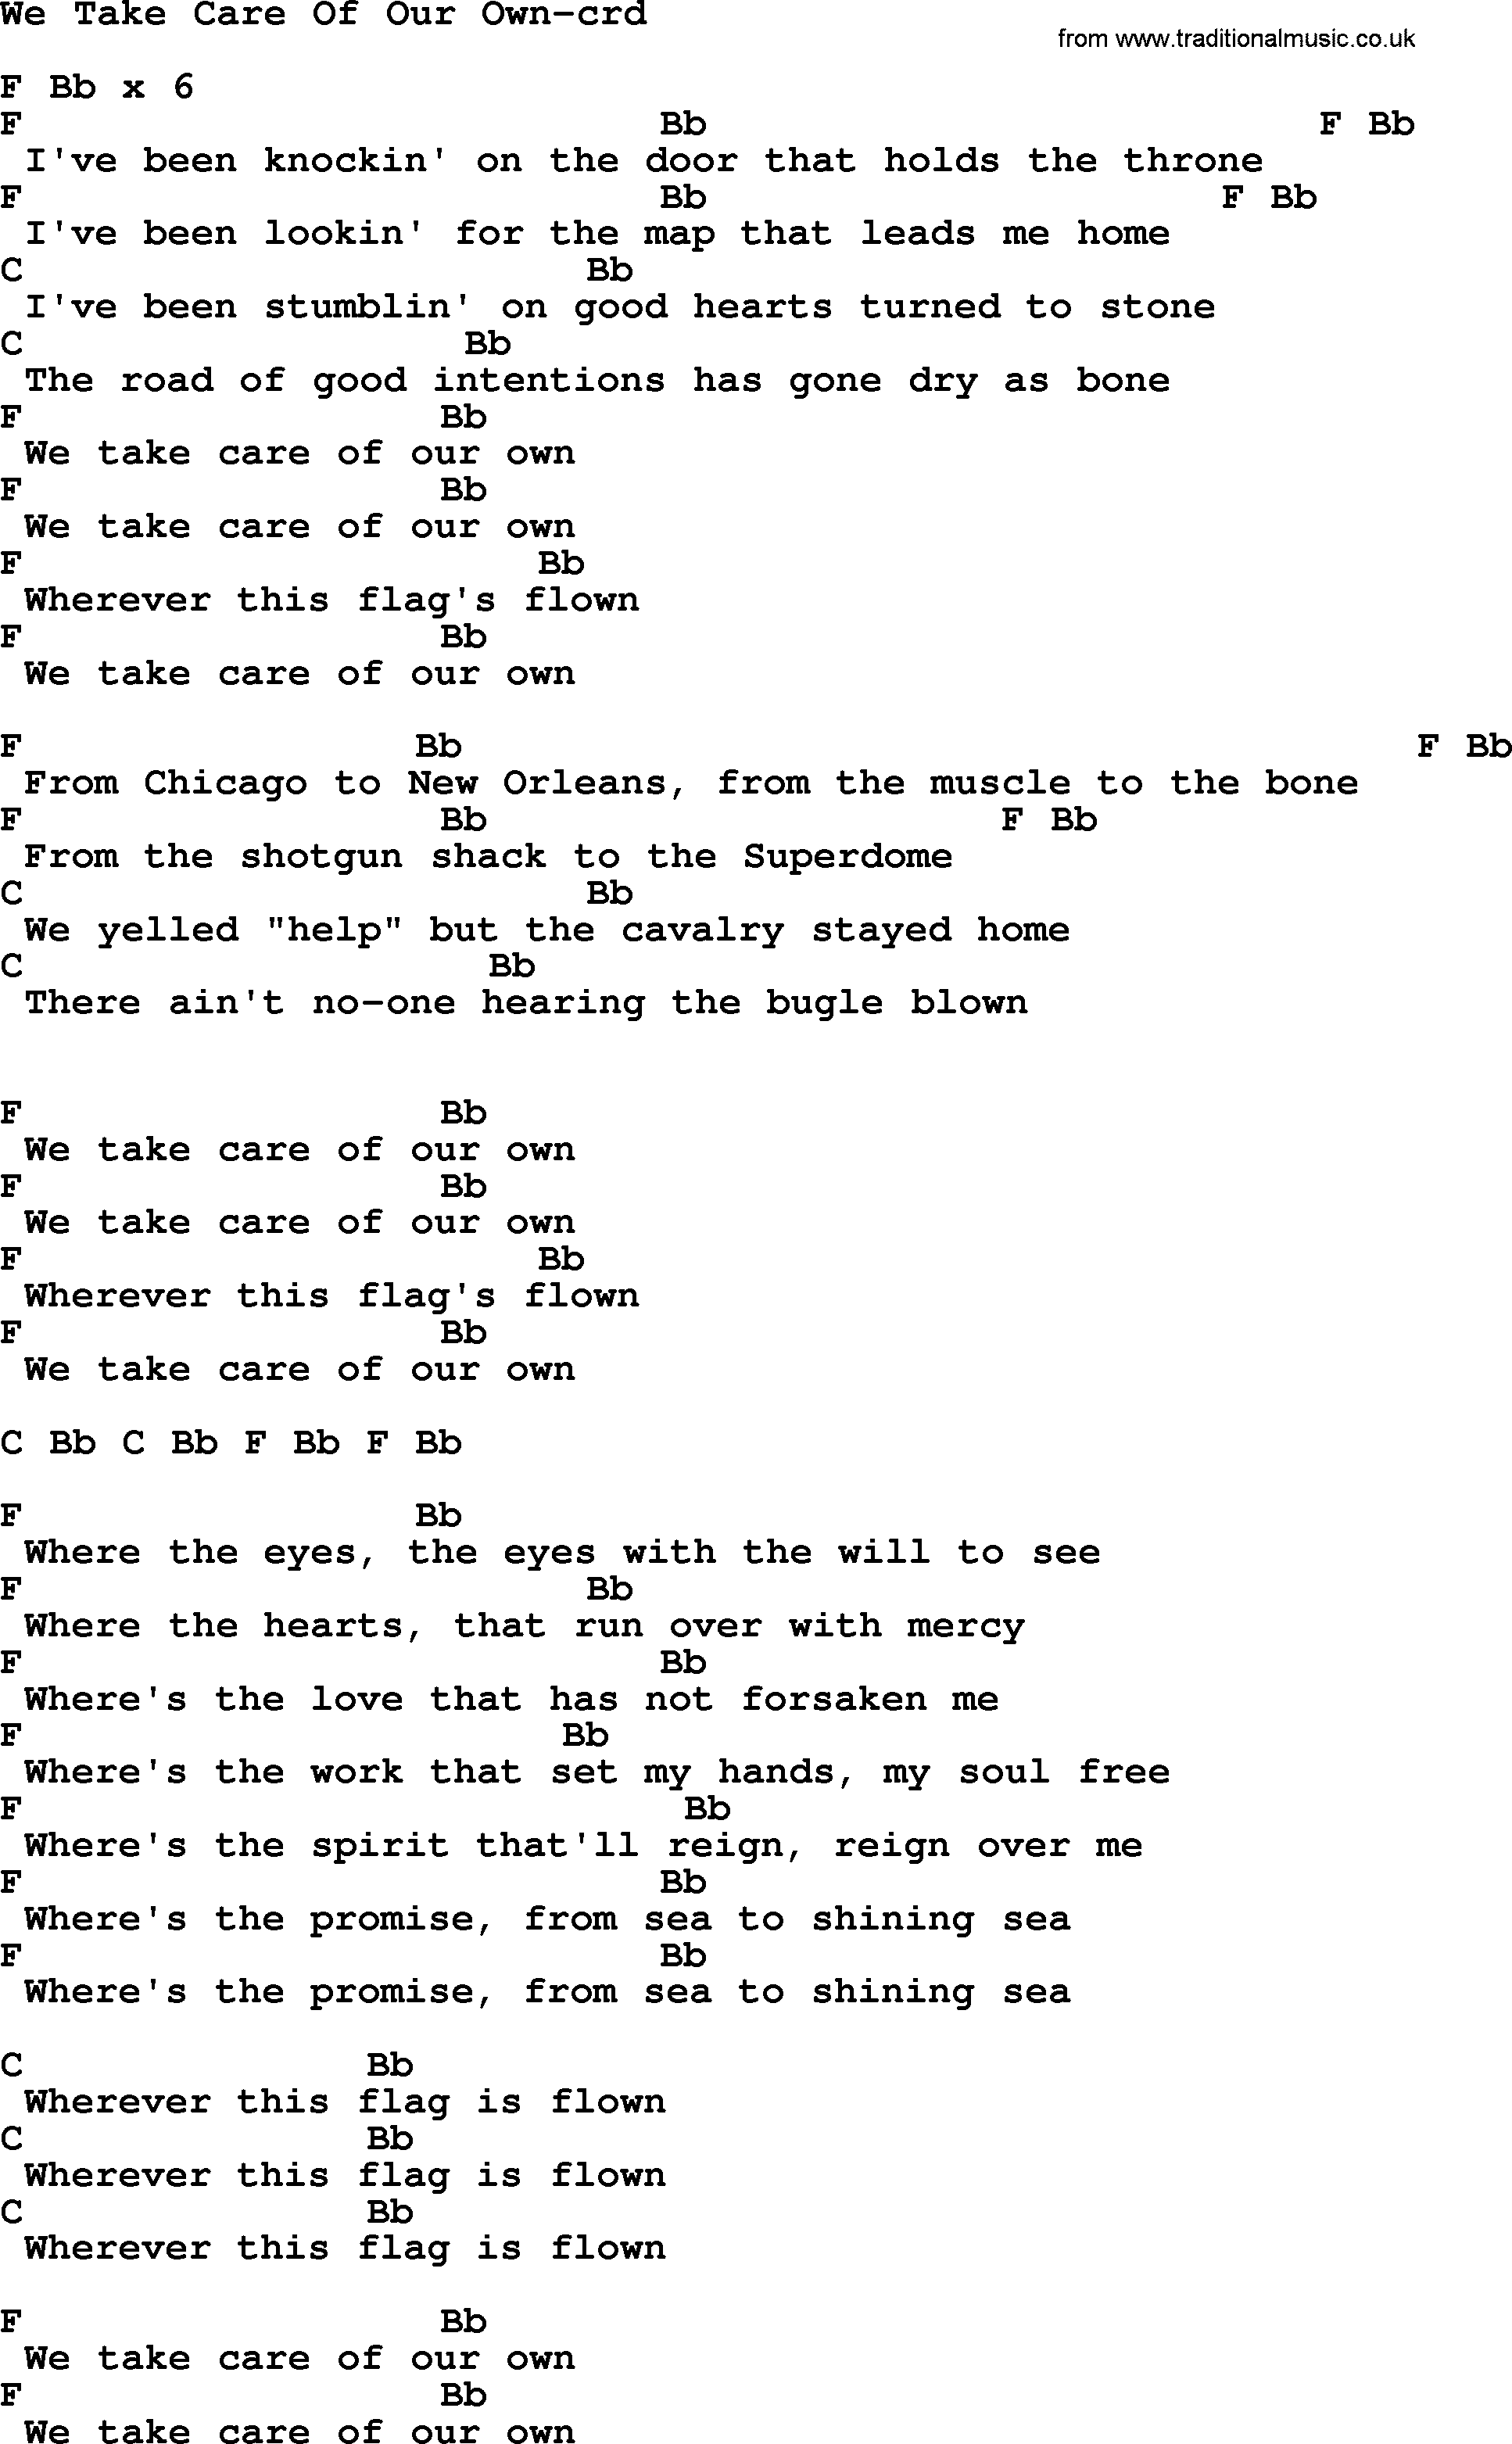 Bruce Springsteen song: We Take Care Of Our Own, lyrics and chords